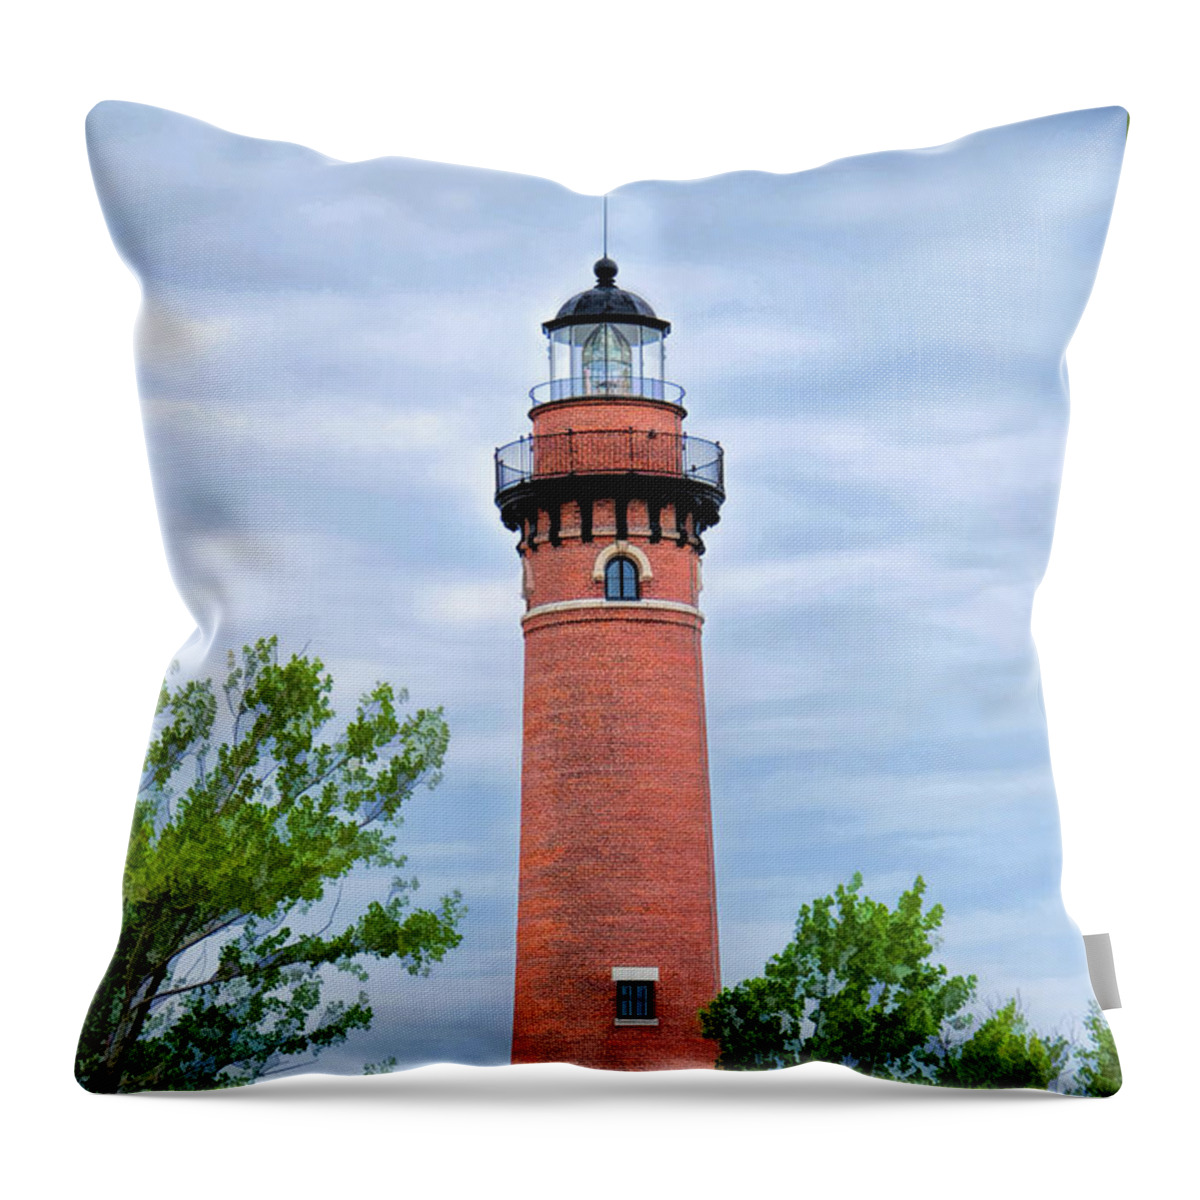 Little Sable Throw Pillow featuring the painting Little Sable Lighthouse by Christopher Arndt